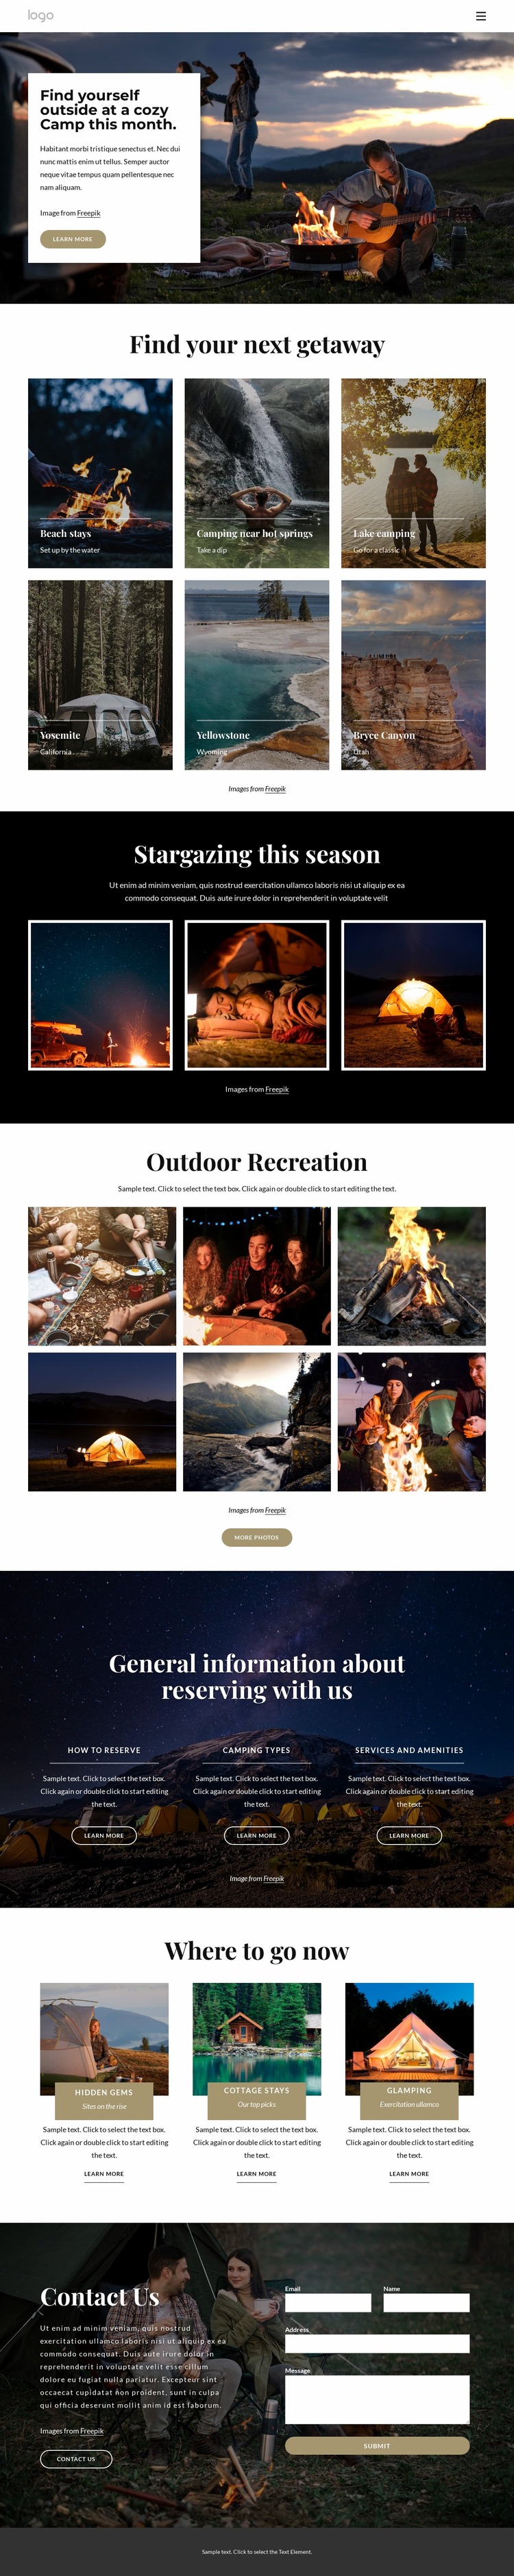 Going on a camping trip Html Website Builder